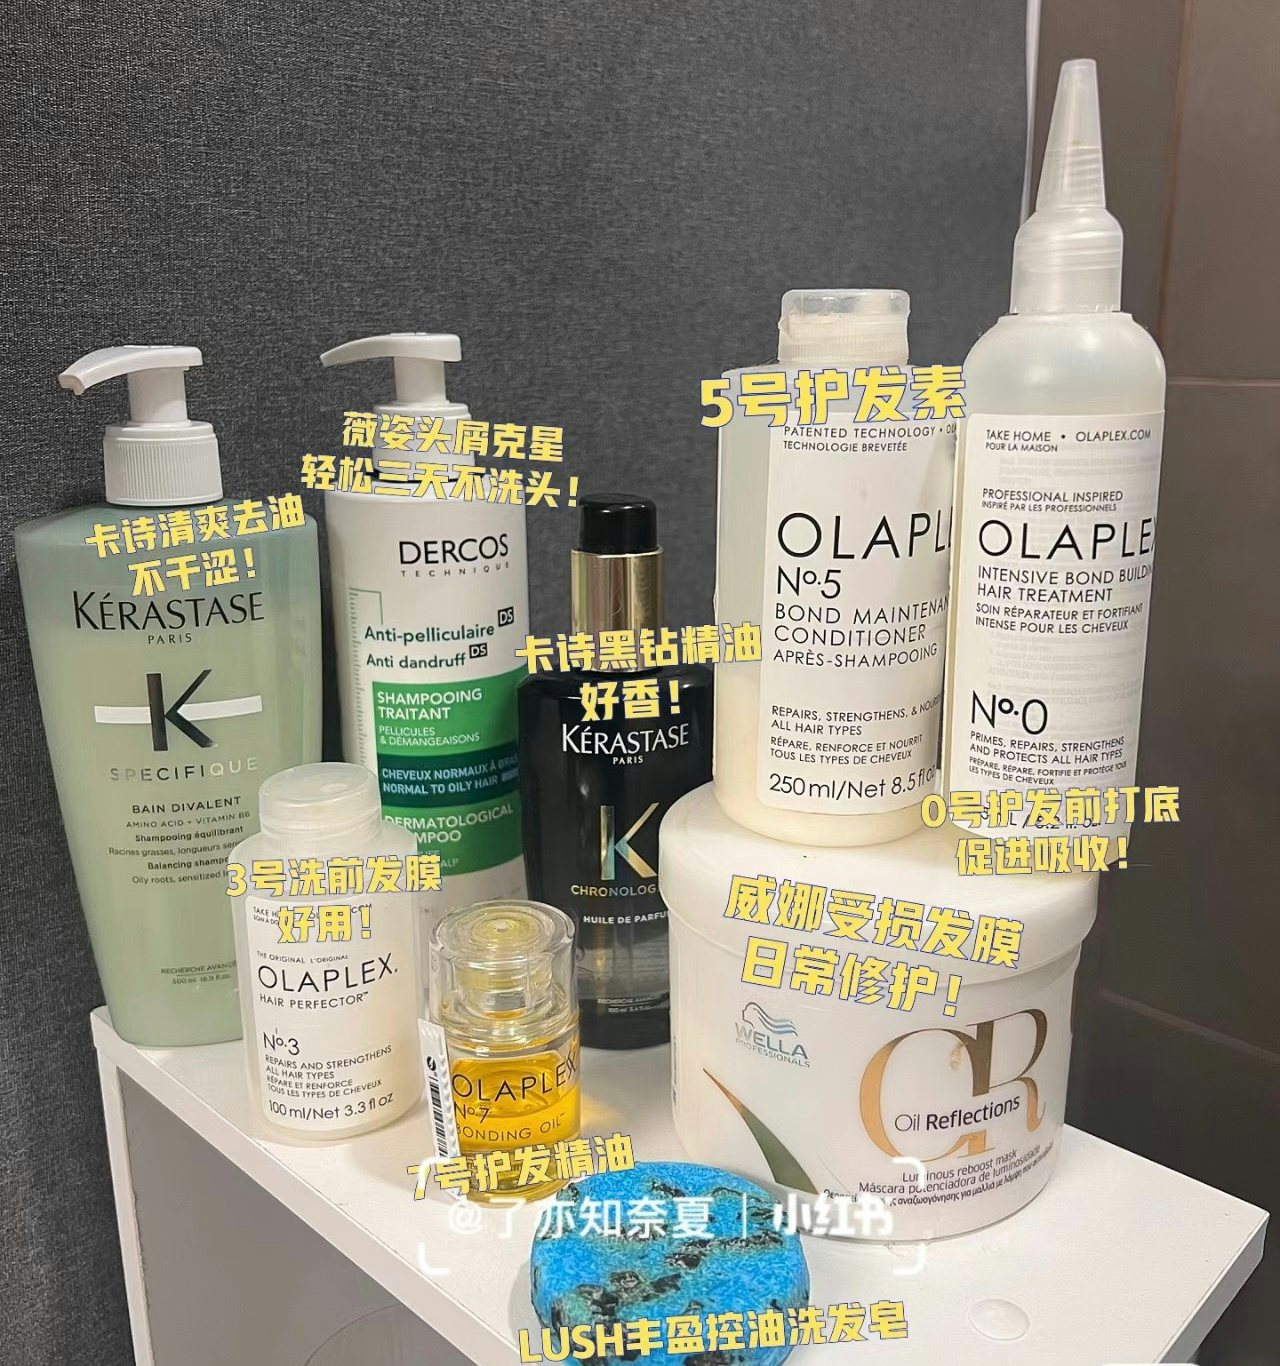 Premium haircare brands Olaplex and Kérastase have tapped China's booming haircare market: Photo: Xiaohongshu